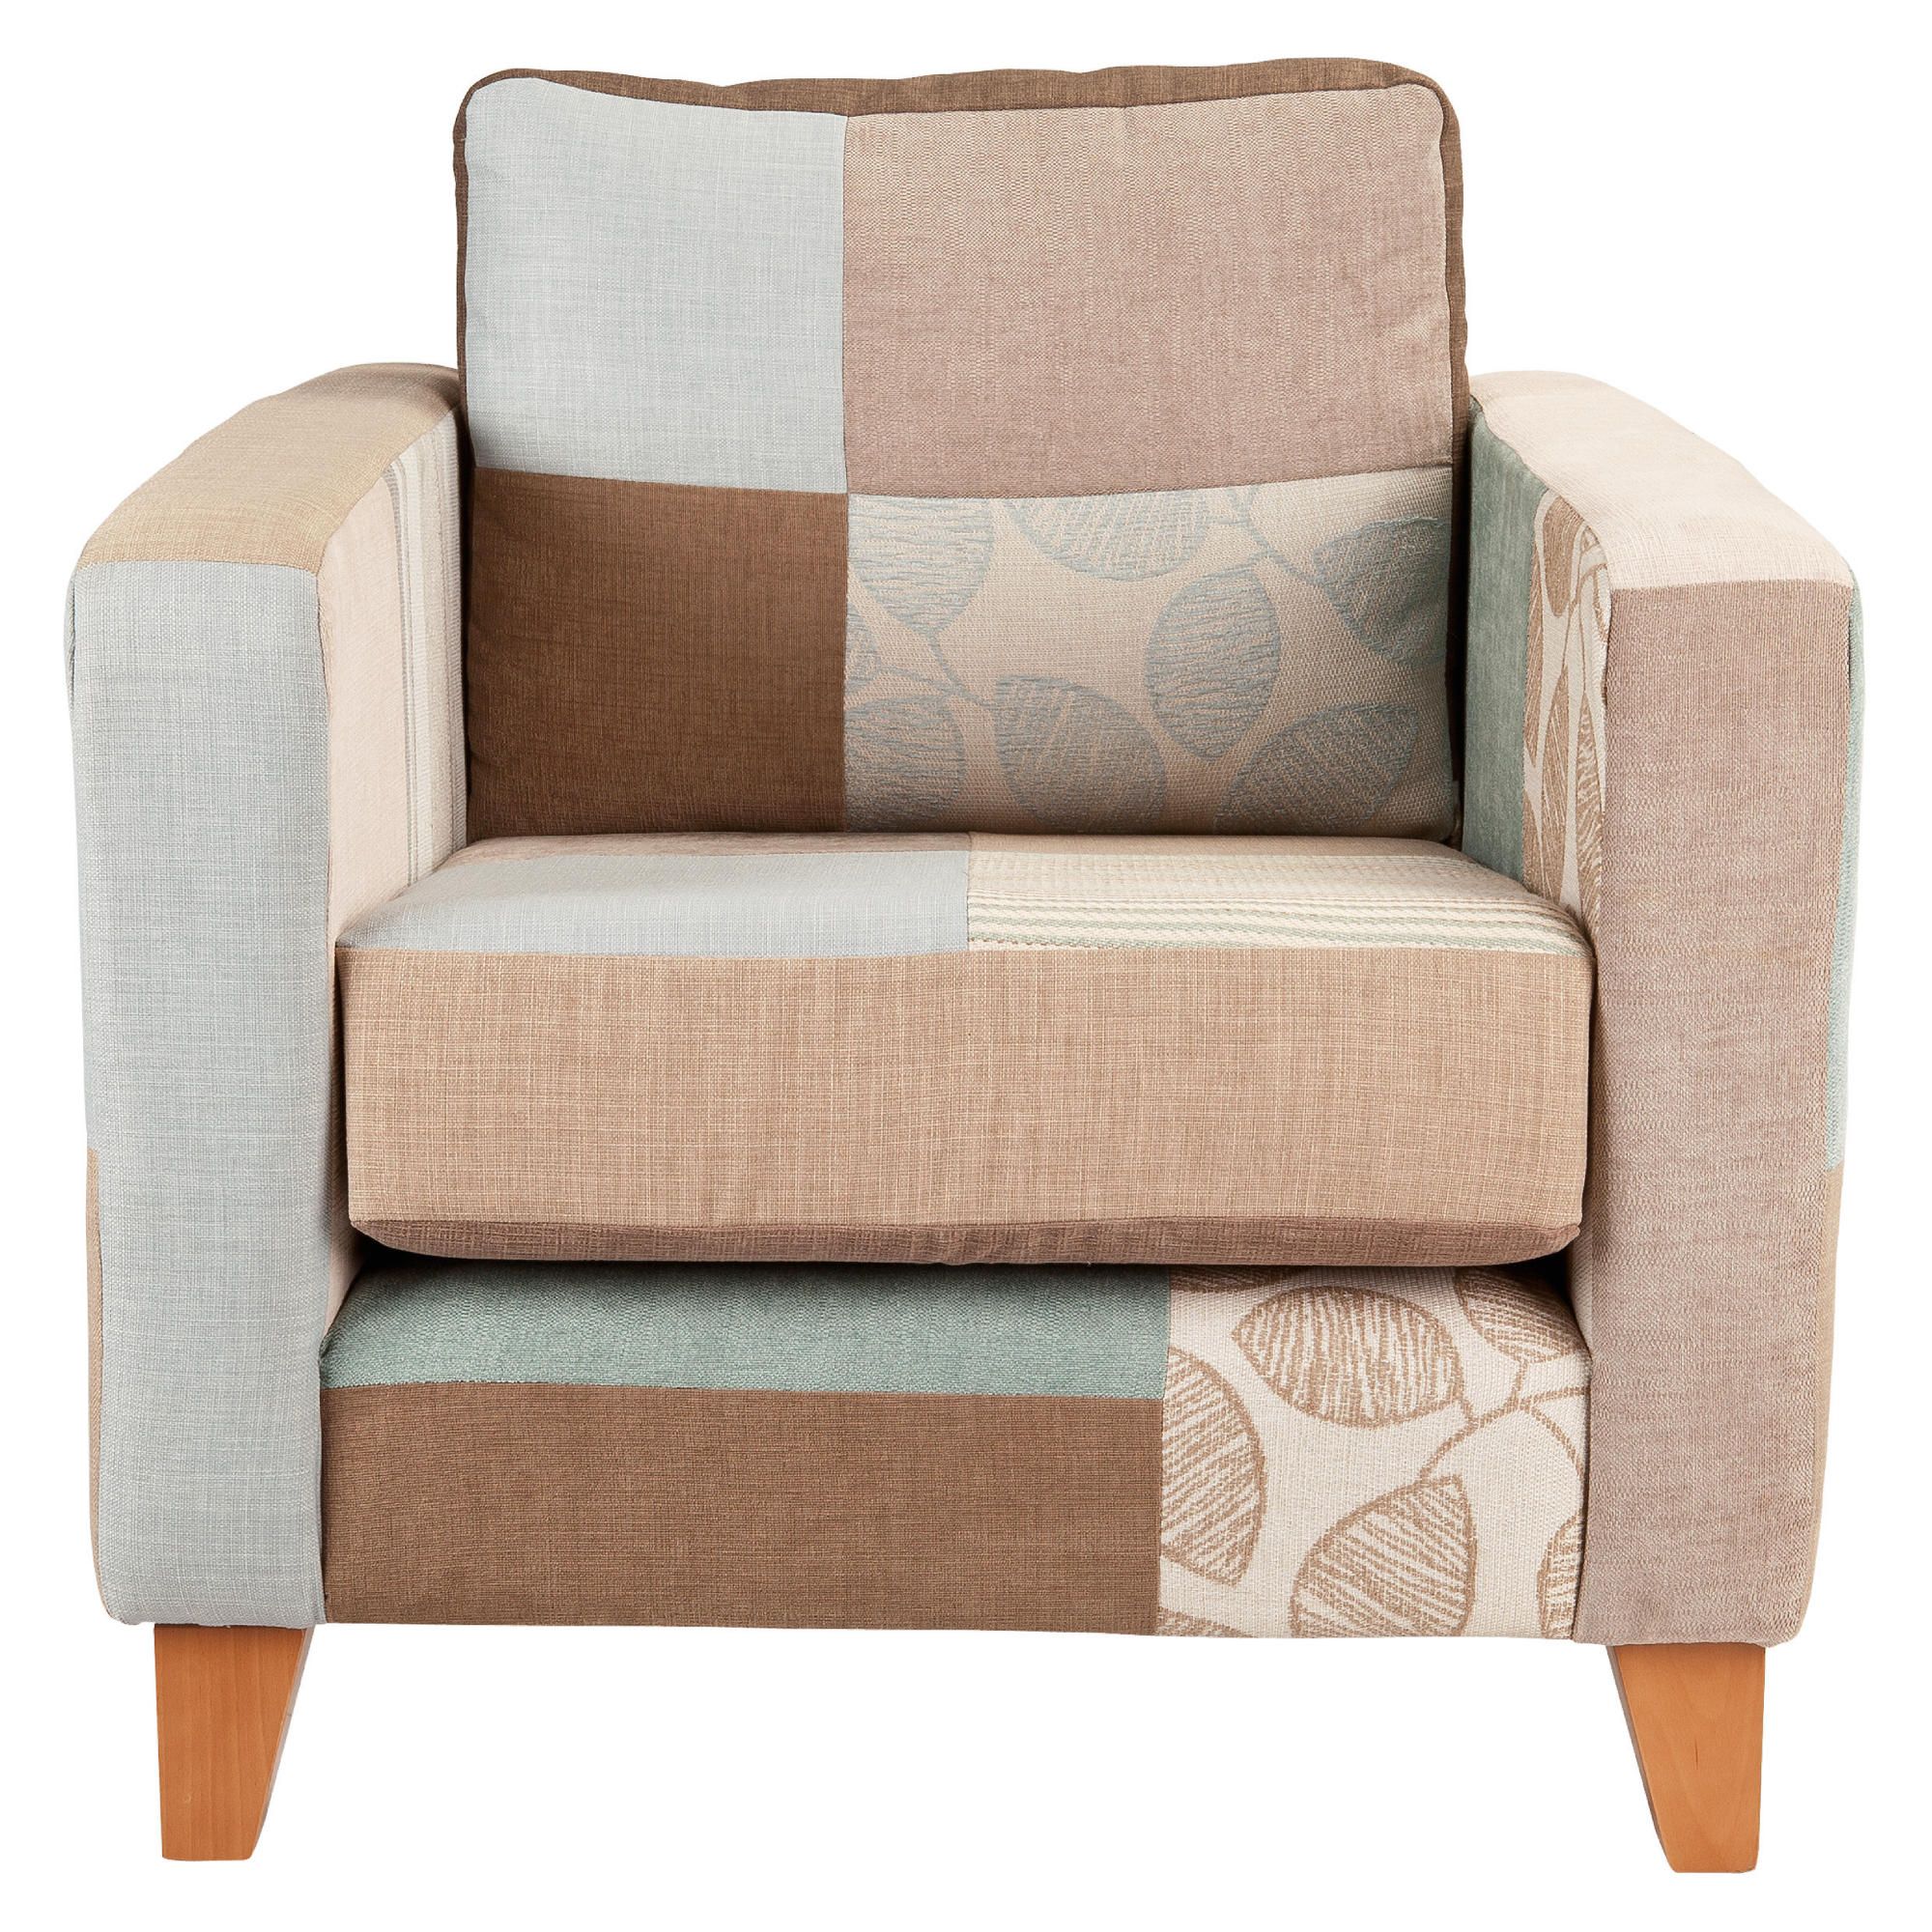 Patchwork chair natural at Tesco Direct